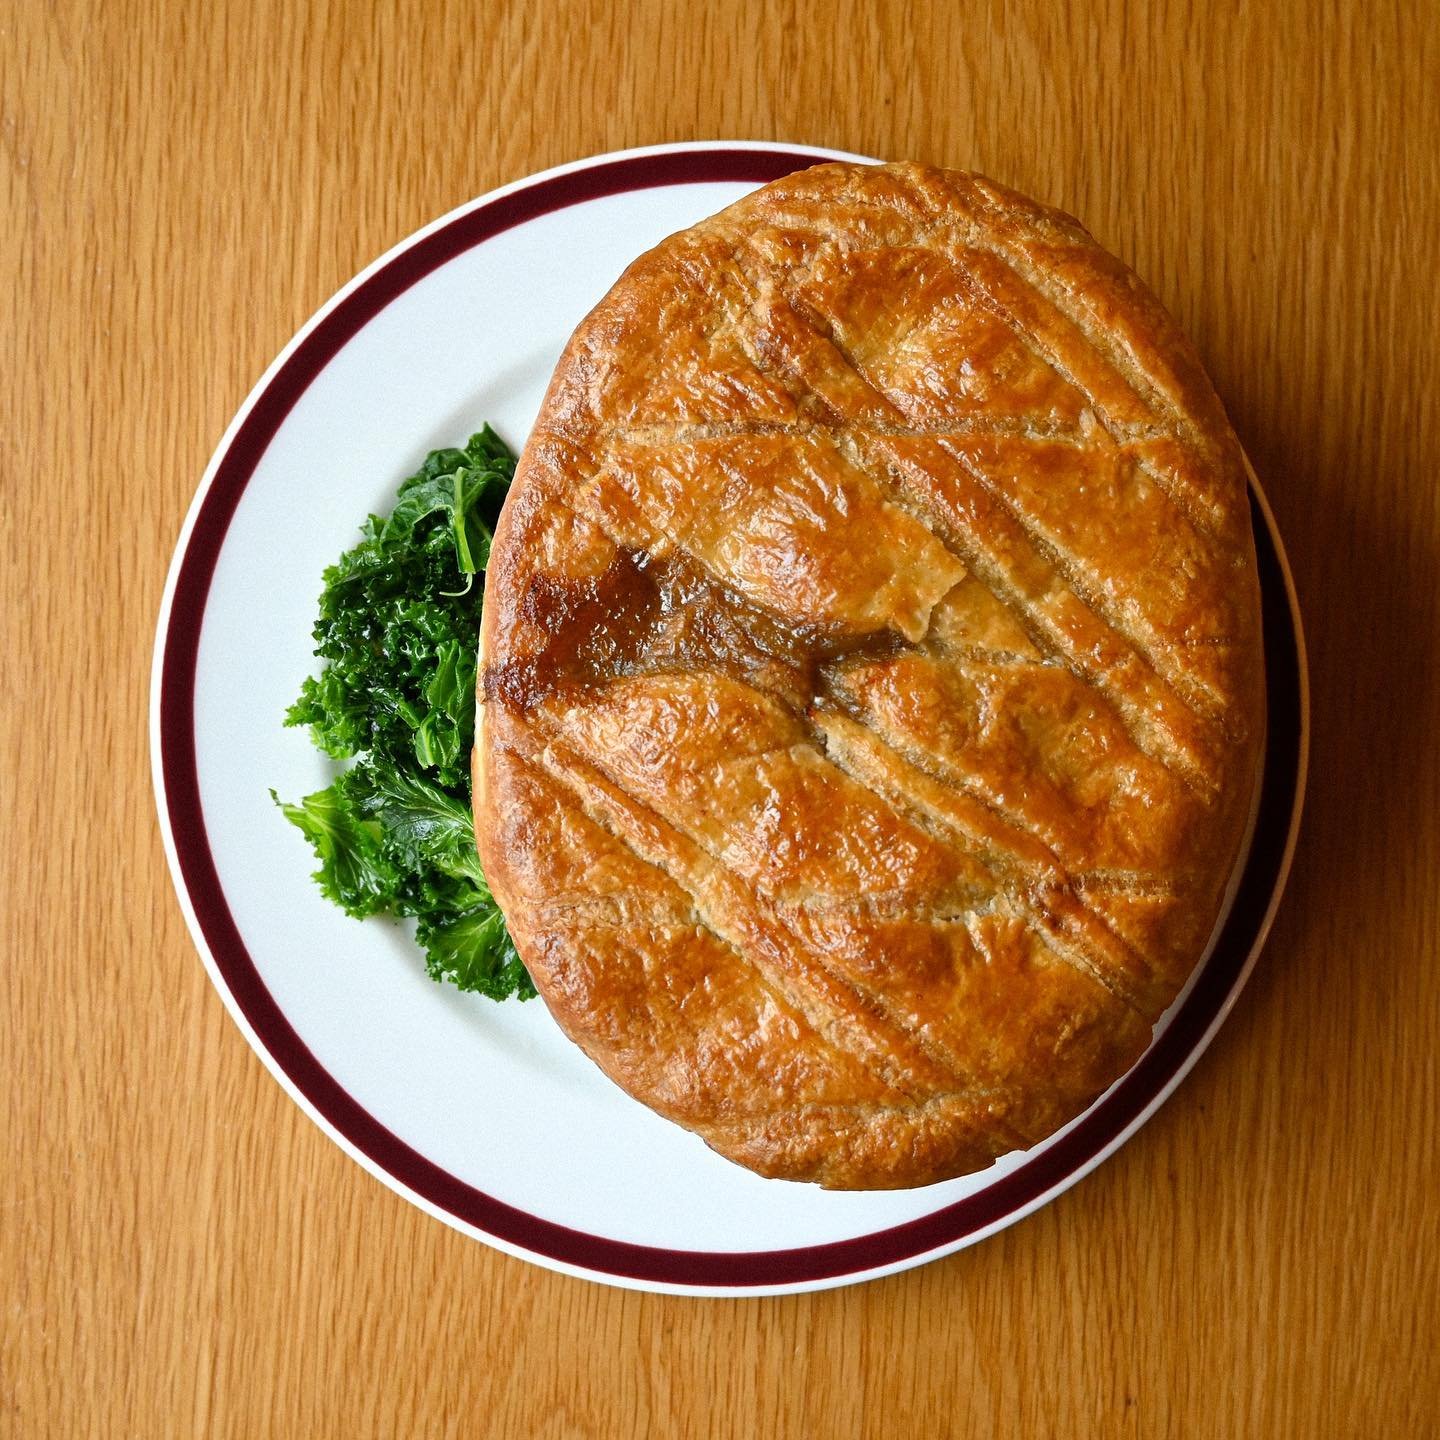 Guinness &amp; Mushroom Pie

Topper with a flaky puff pastry lid and served with steamed kale. 

Field and chestnut mushrooms from @hugosgreengrocer 

#bristolfoodie #visitbristol #bristoleats #luckystrikebristol